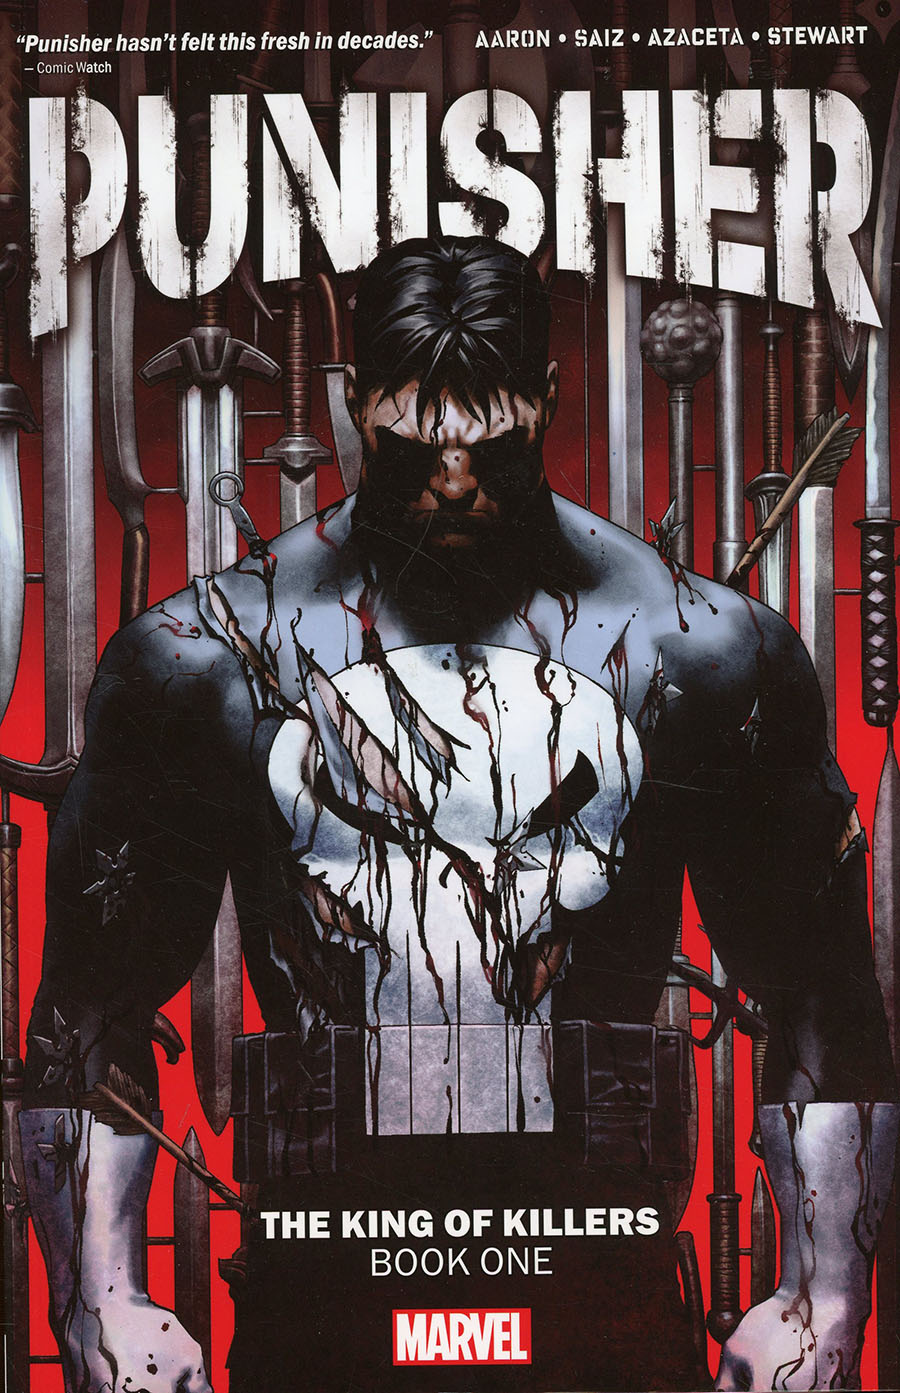 Punisher (2022) Vol 1 The King Of Killers Book 1 TP